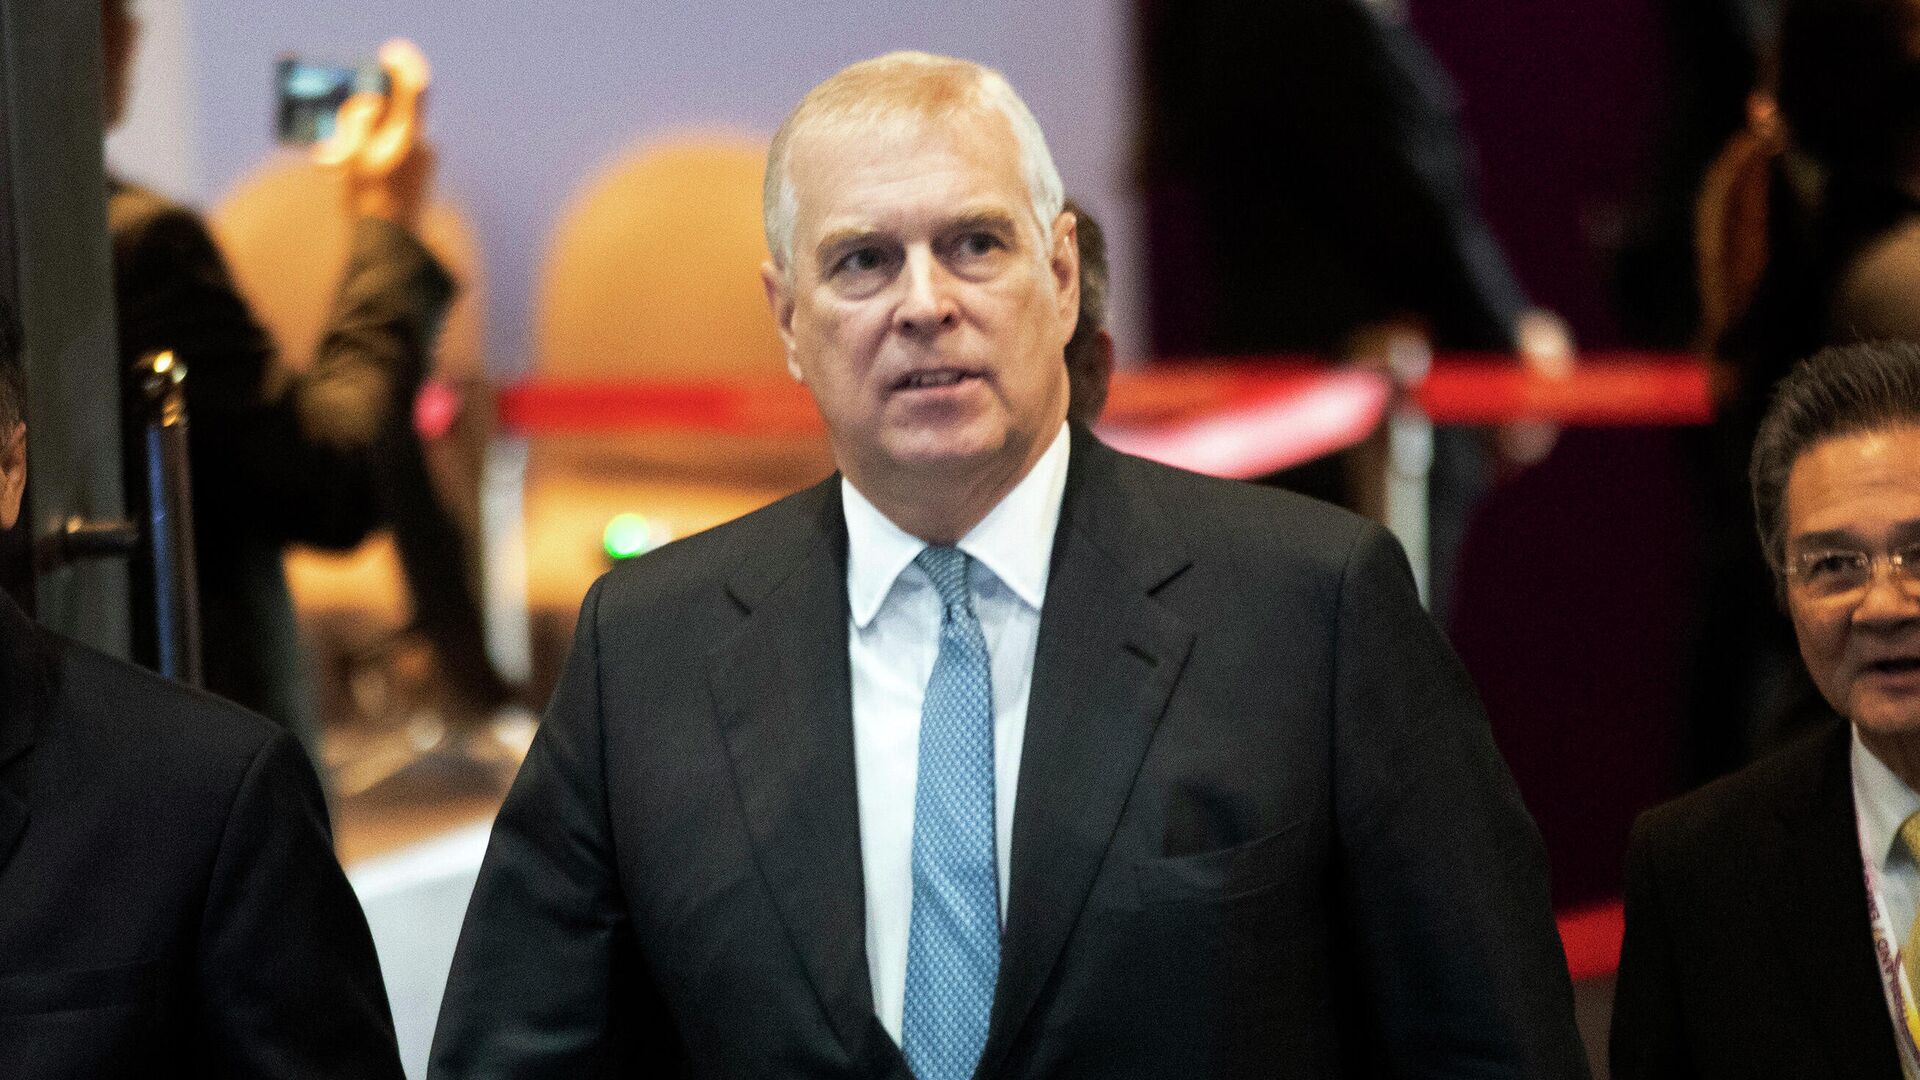 In this Nov. 3, 2019 file photo, Britain's Prince Andrew arrives at ASEAN Business and Investment Summit (ABIS) in Nonthaburi, Thailand. Prince Andrew wasn’t on trial in the Ghislaine Maxwell sex trafficking case, but her conviction is bad news for the man who is ninth in line to the British throne. (AP Photo/Sakchai Lalit, file) - Sputnik International, 1920, 19.06.2022